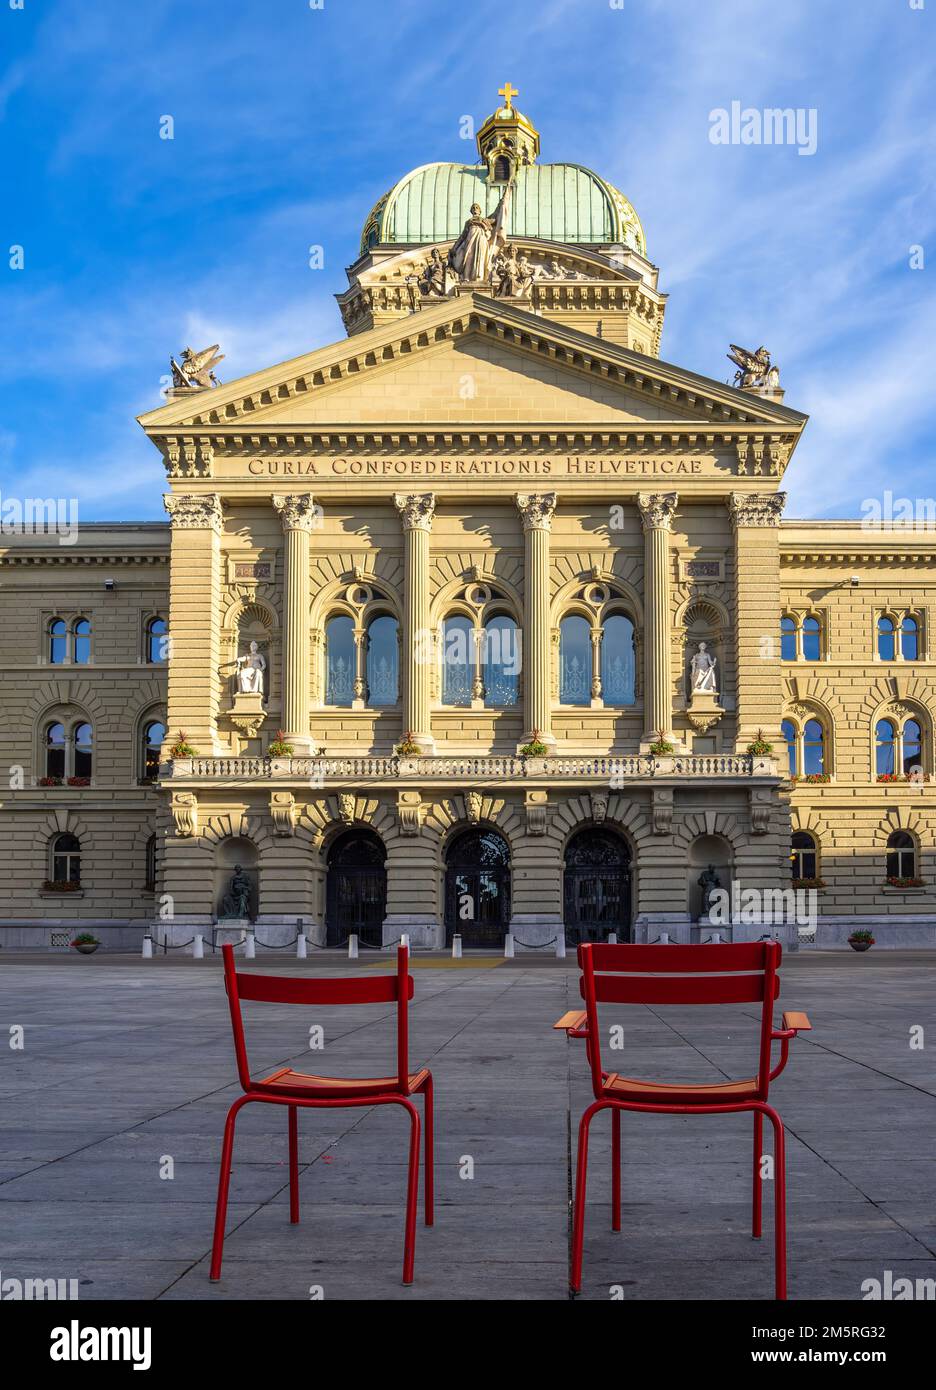 Bern, Switzerland - July 12, 2022: Two red chairs in front of the Federal parliament building in Bern, Switzerland Stock Photo